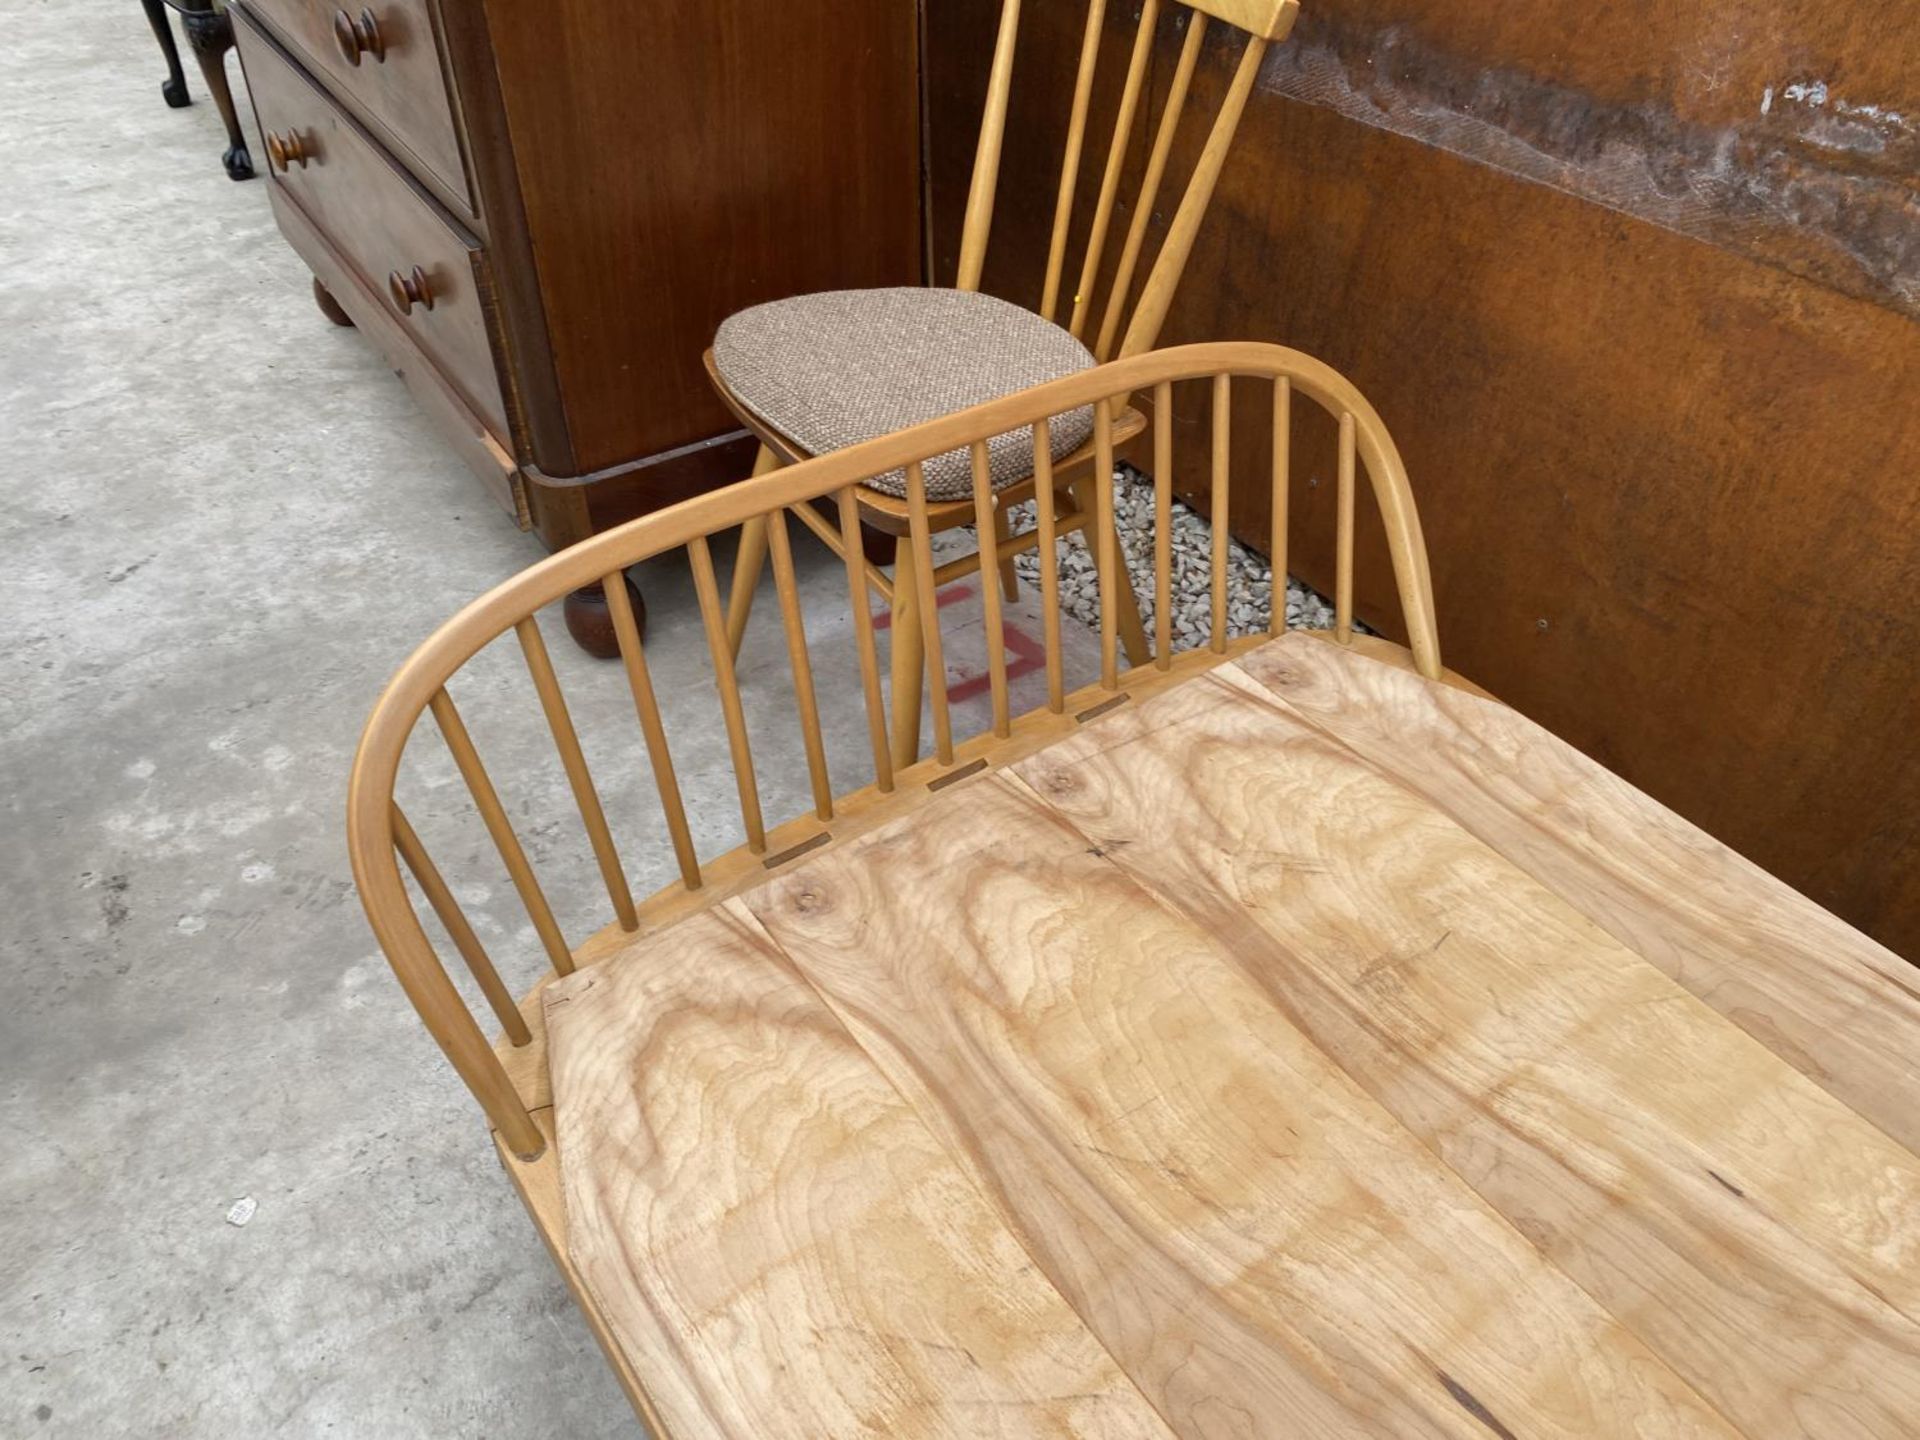 AN ERCOL BLUE LABEL BLONDE 3'6" WINDSOR STYLE BED - Image 3 of 6